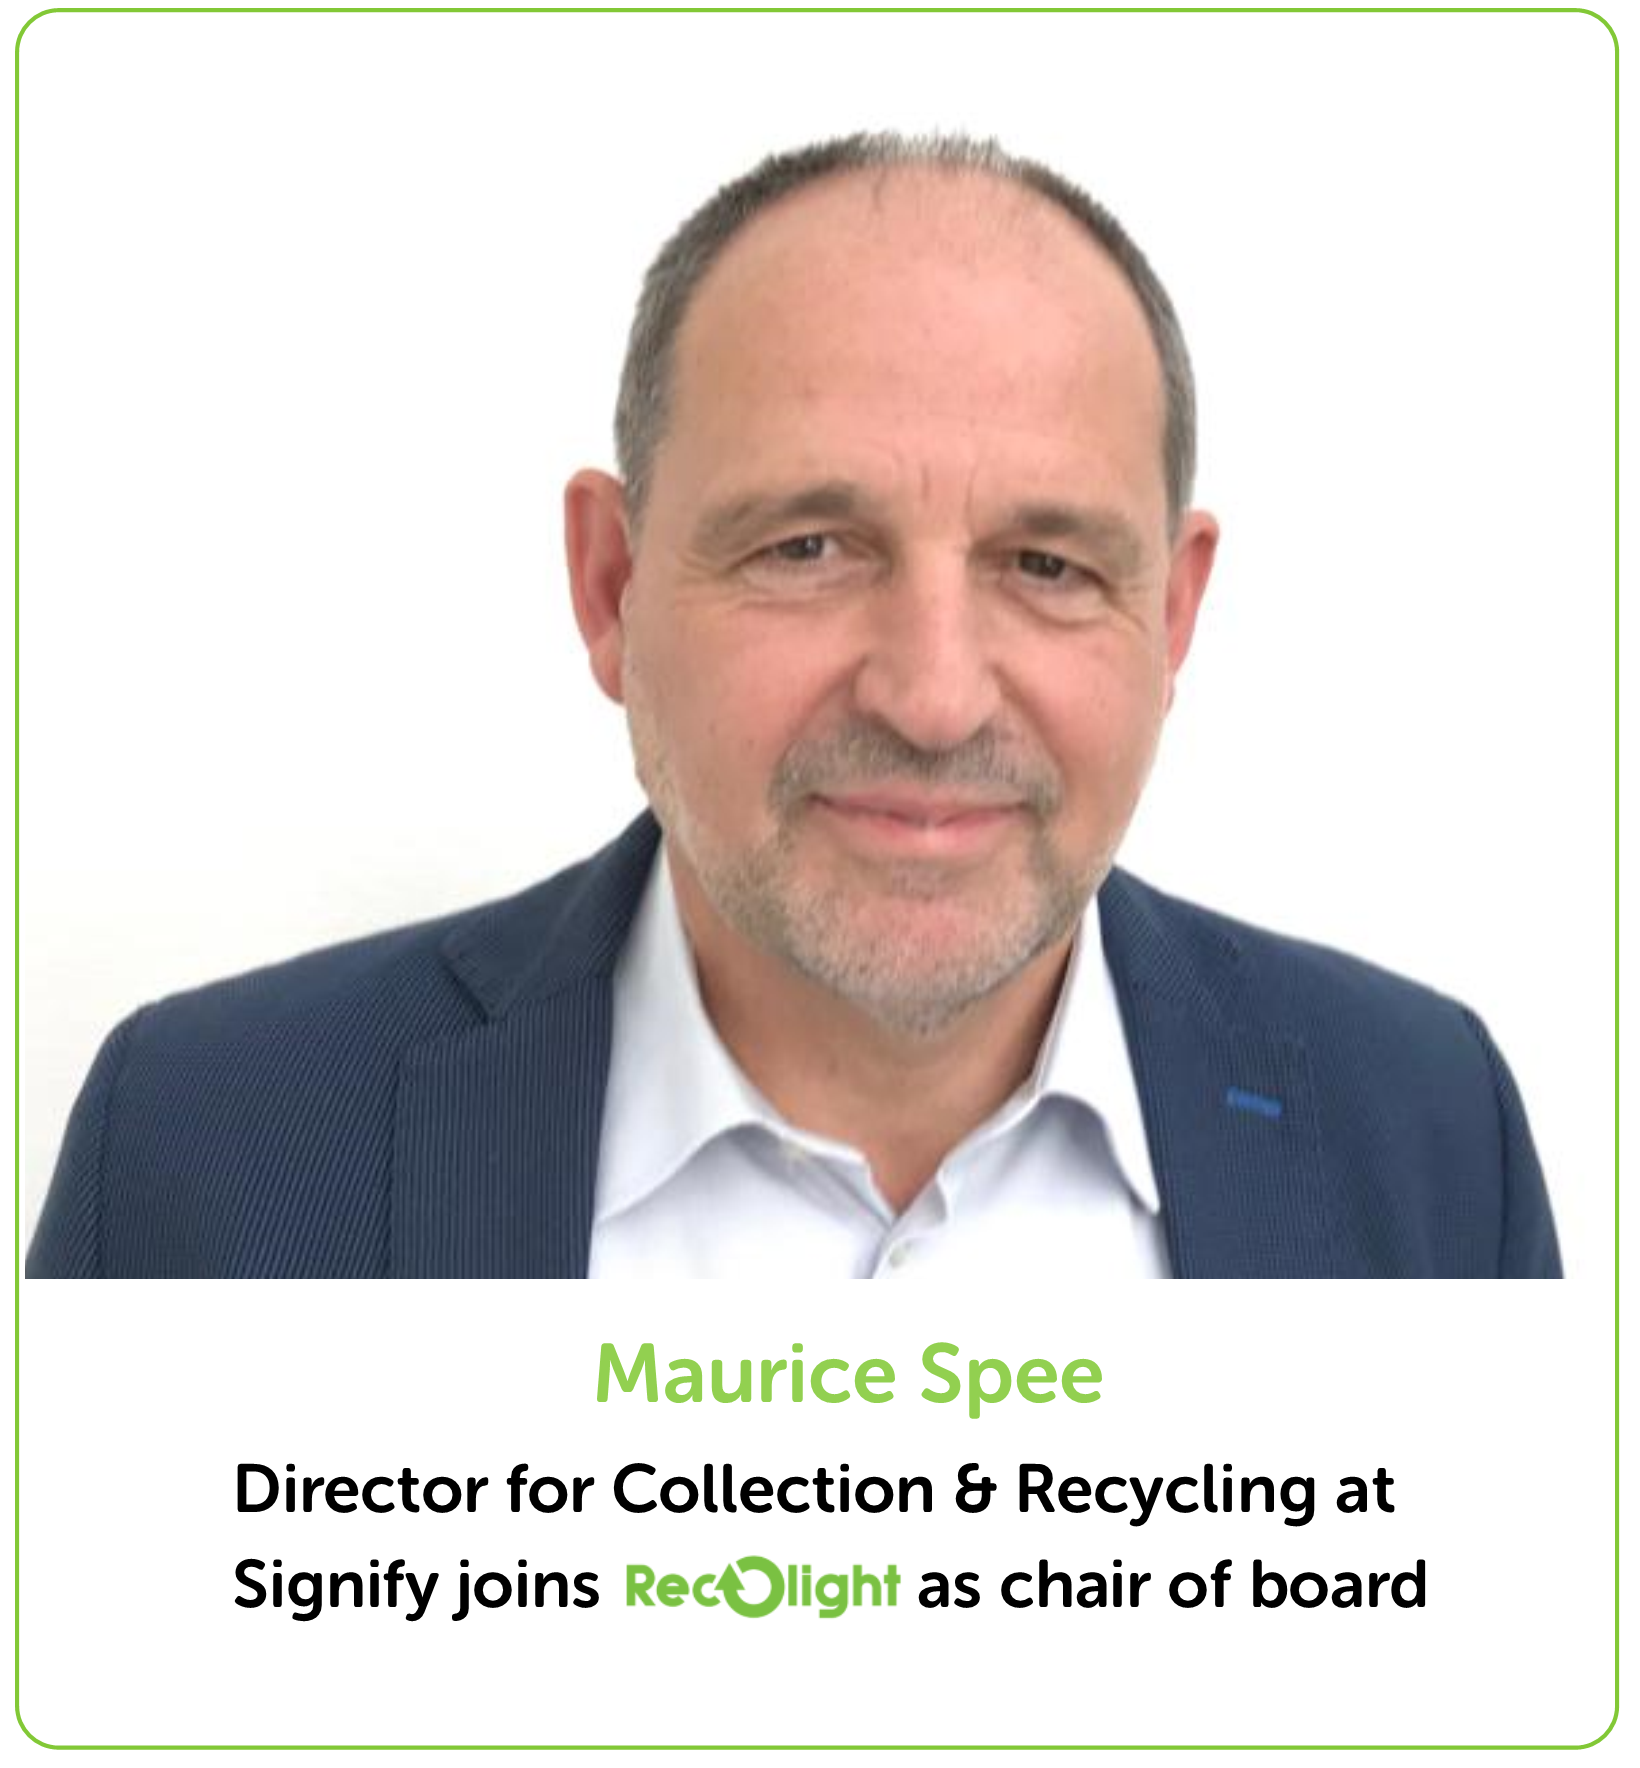 Maurice Spee joins Recoight board as chair